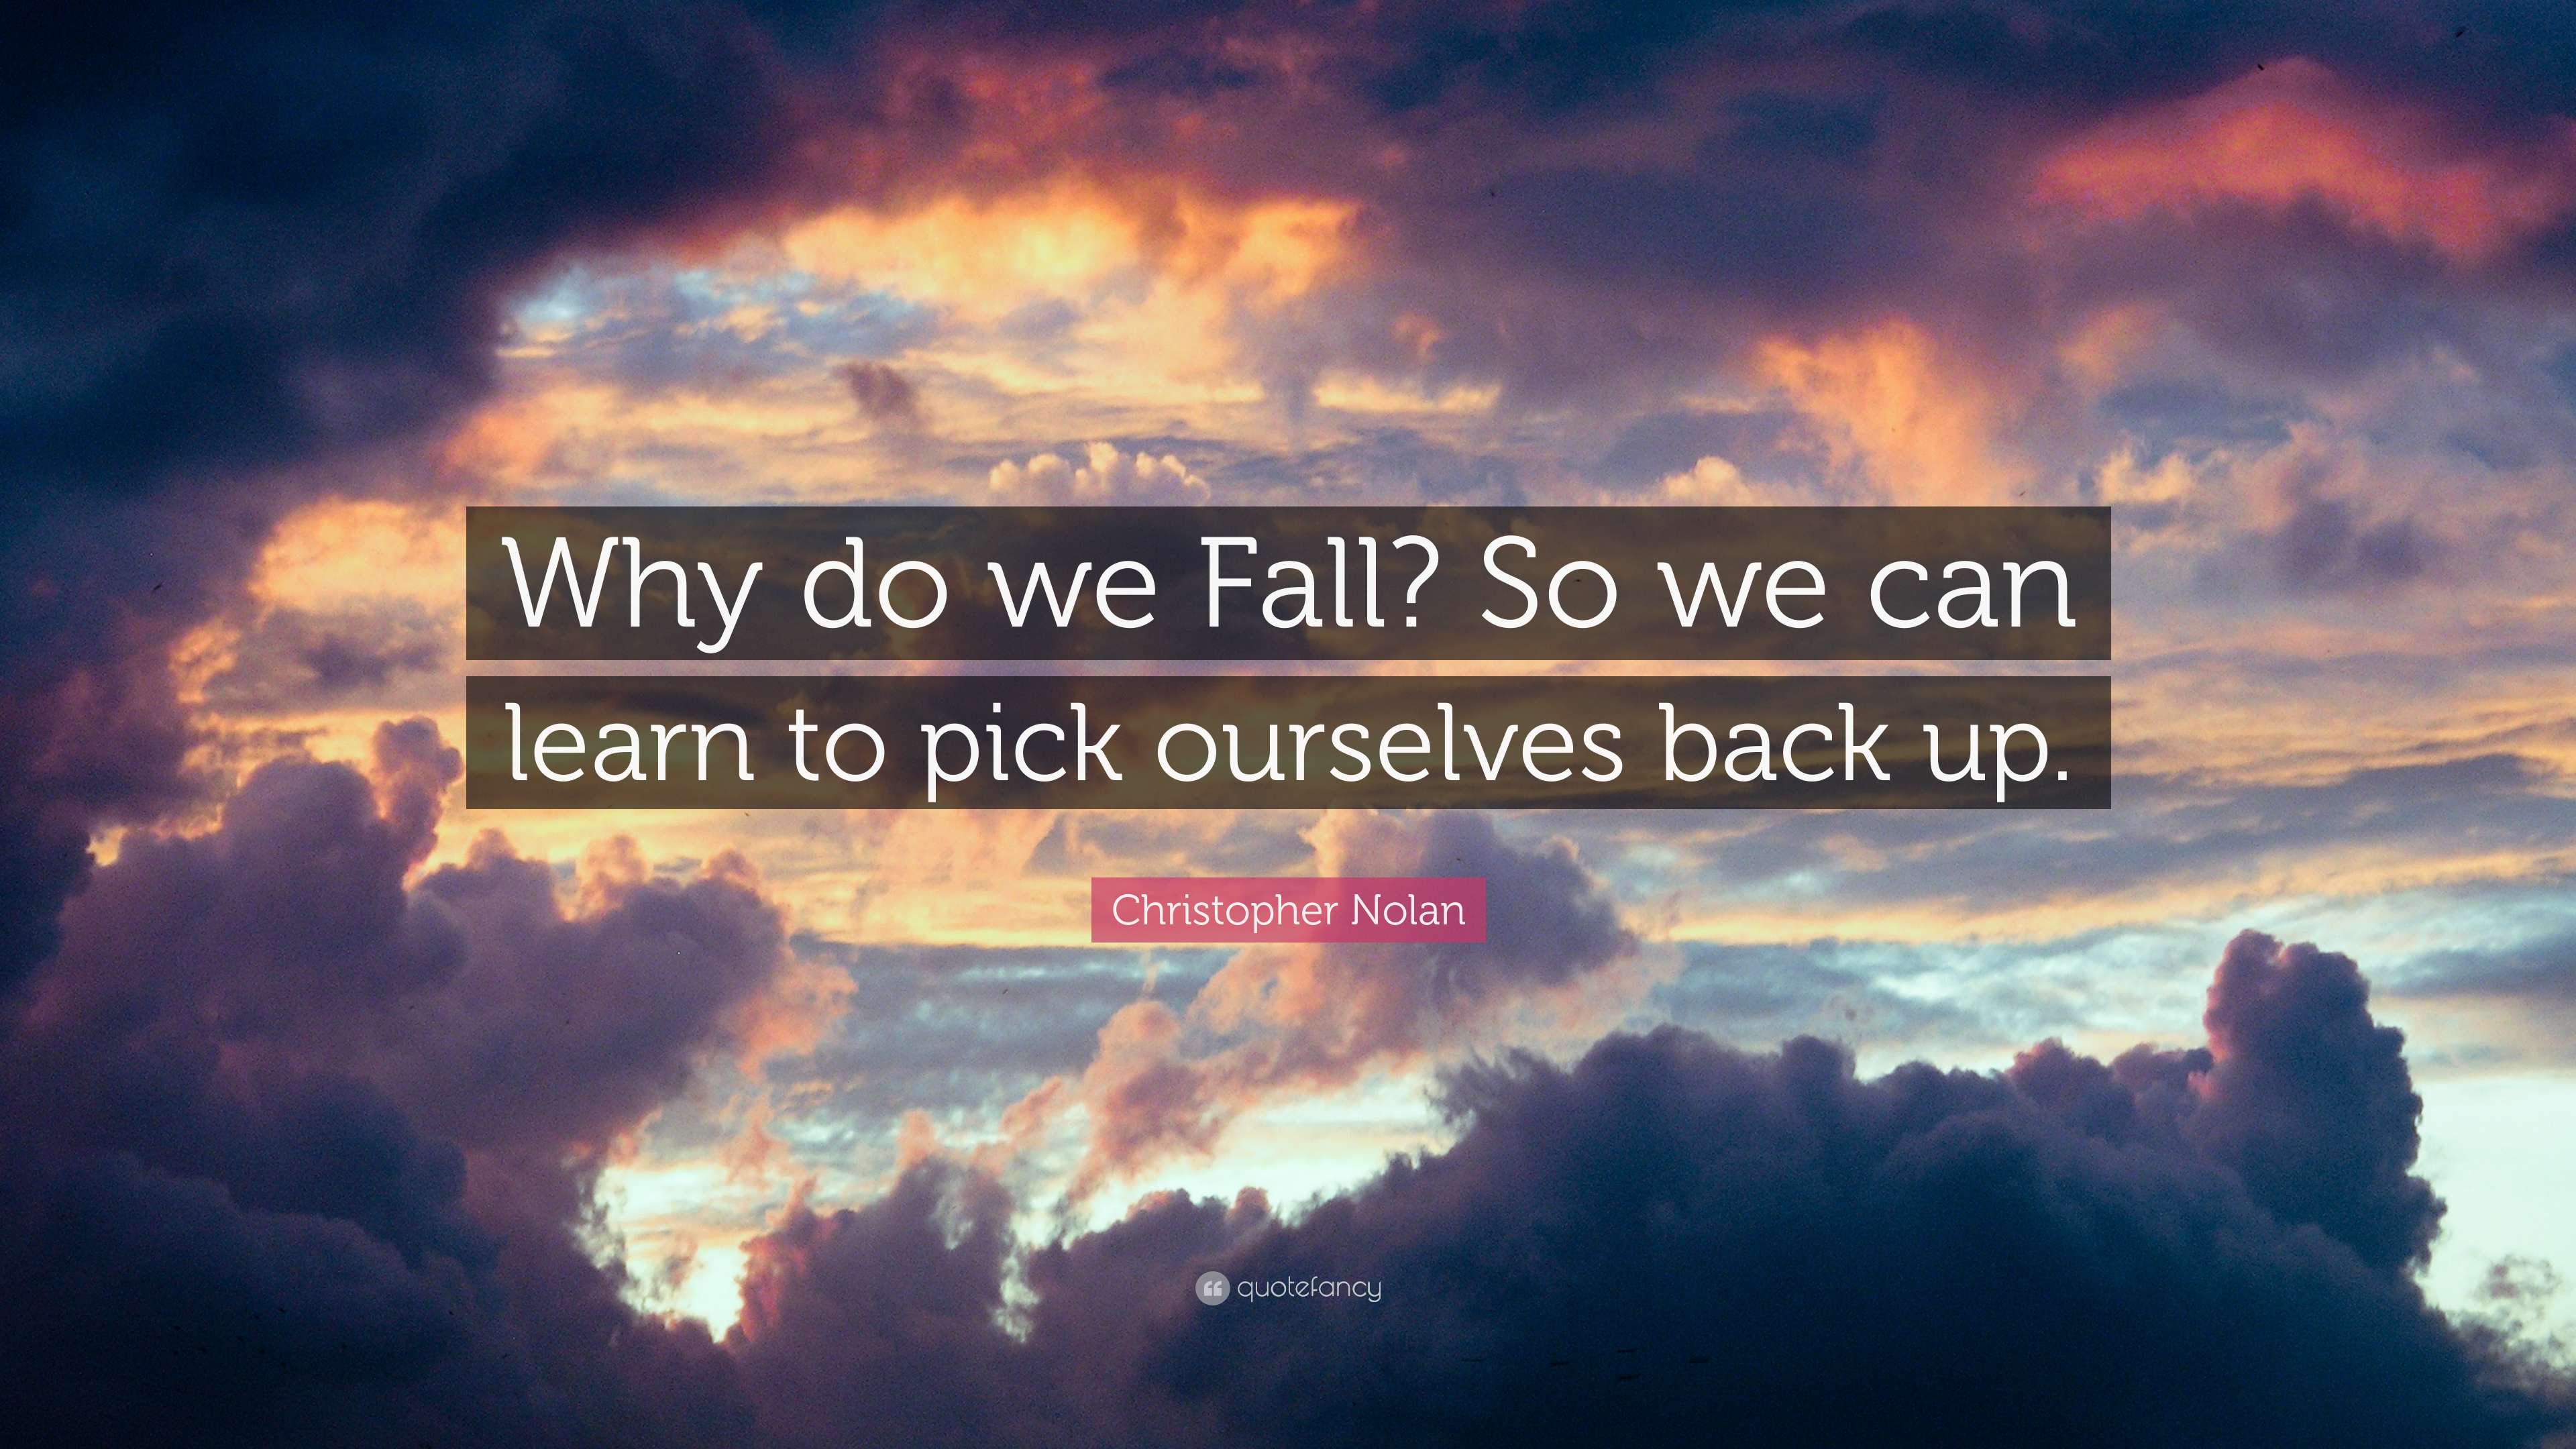 Christopher Nolan Quote: “Why do we Fall? So we can learn to pick ourselves back up.”